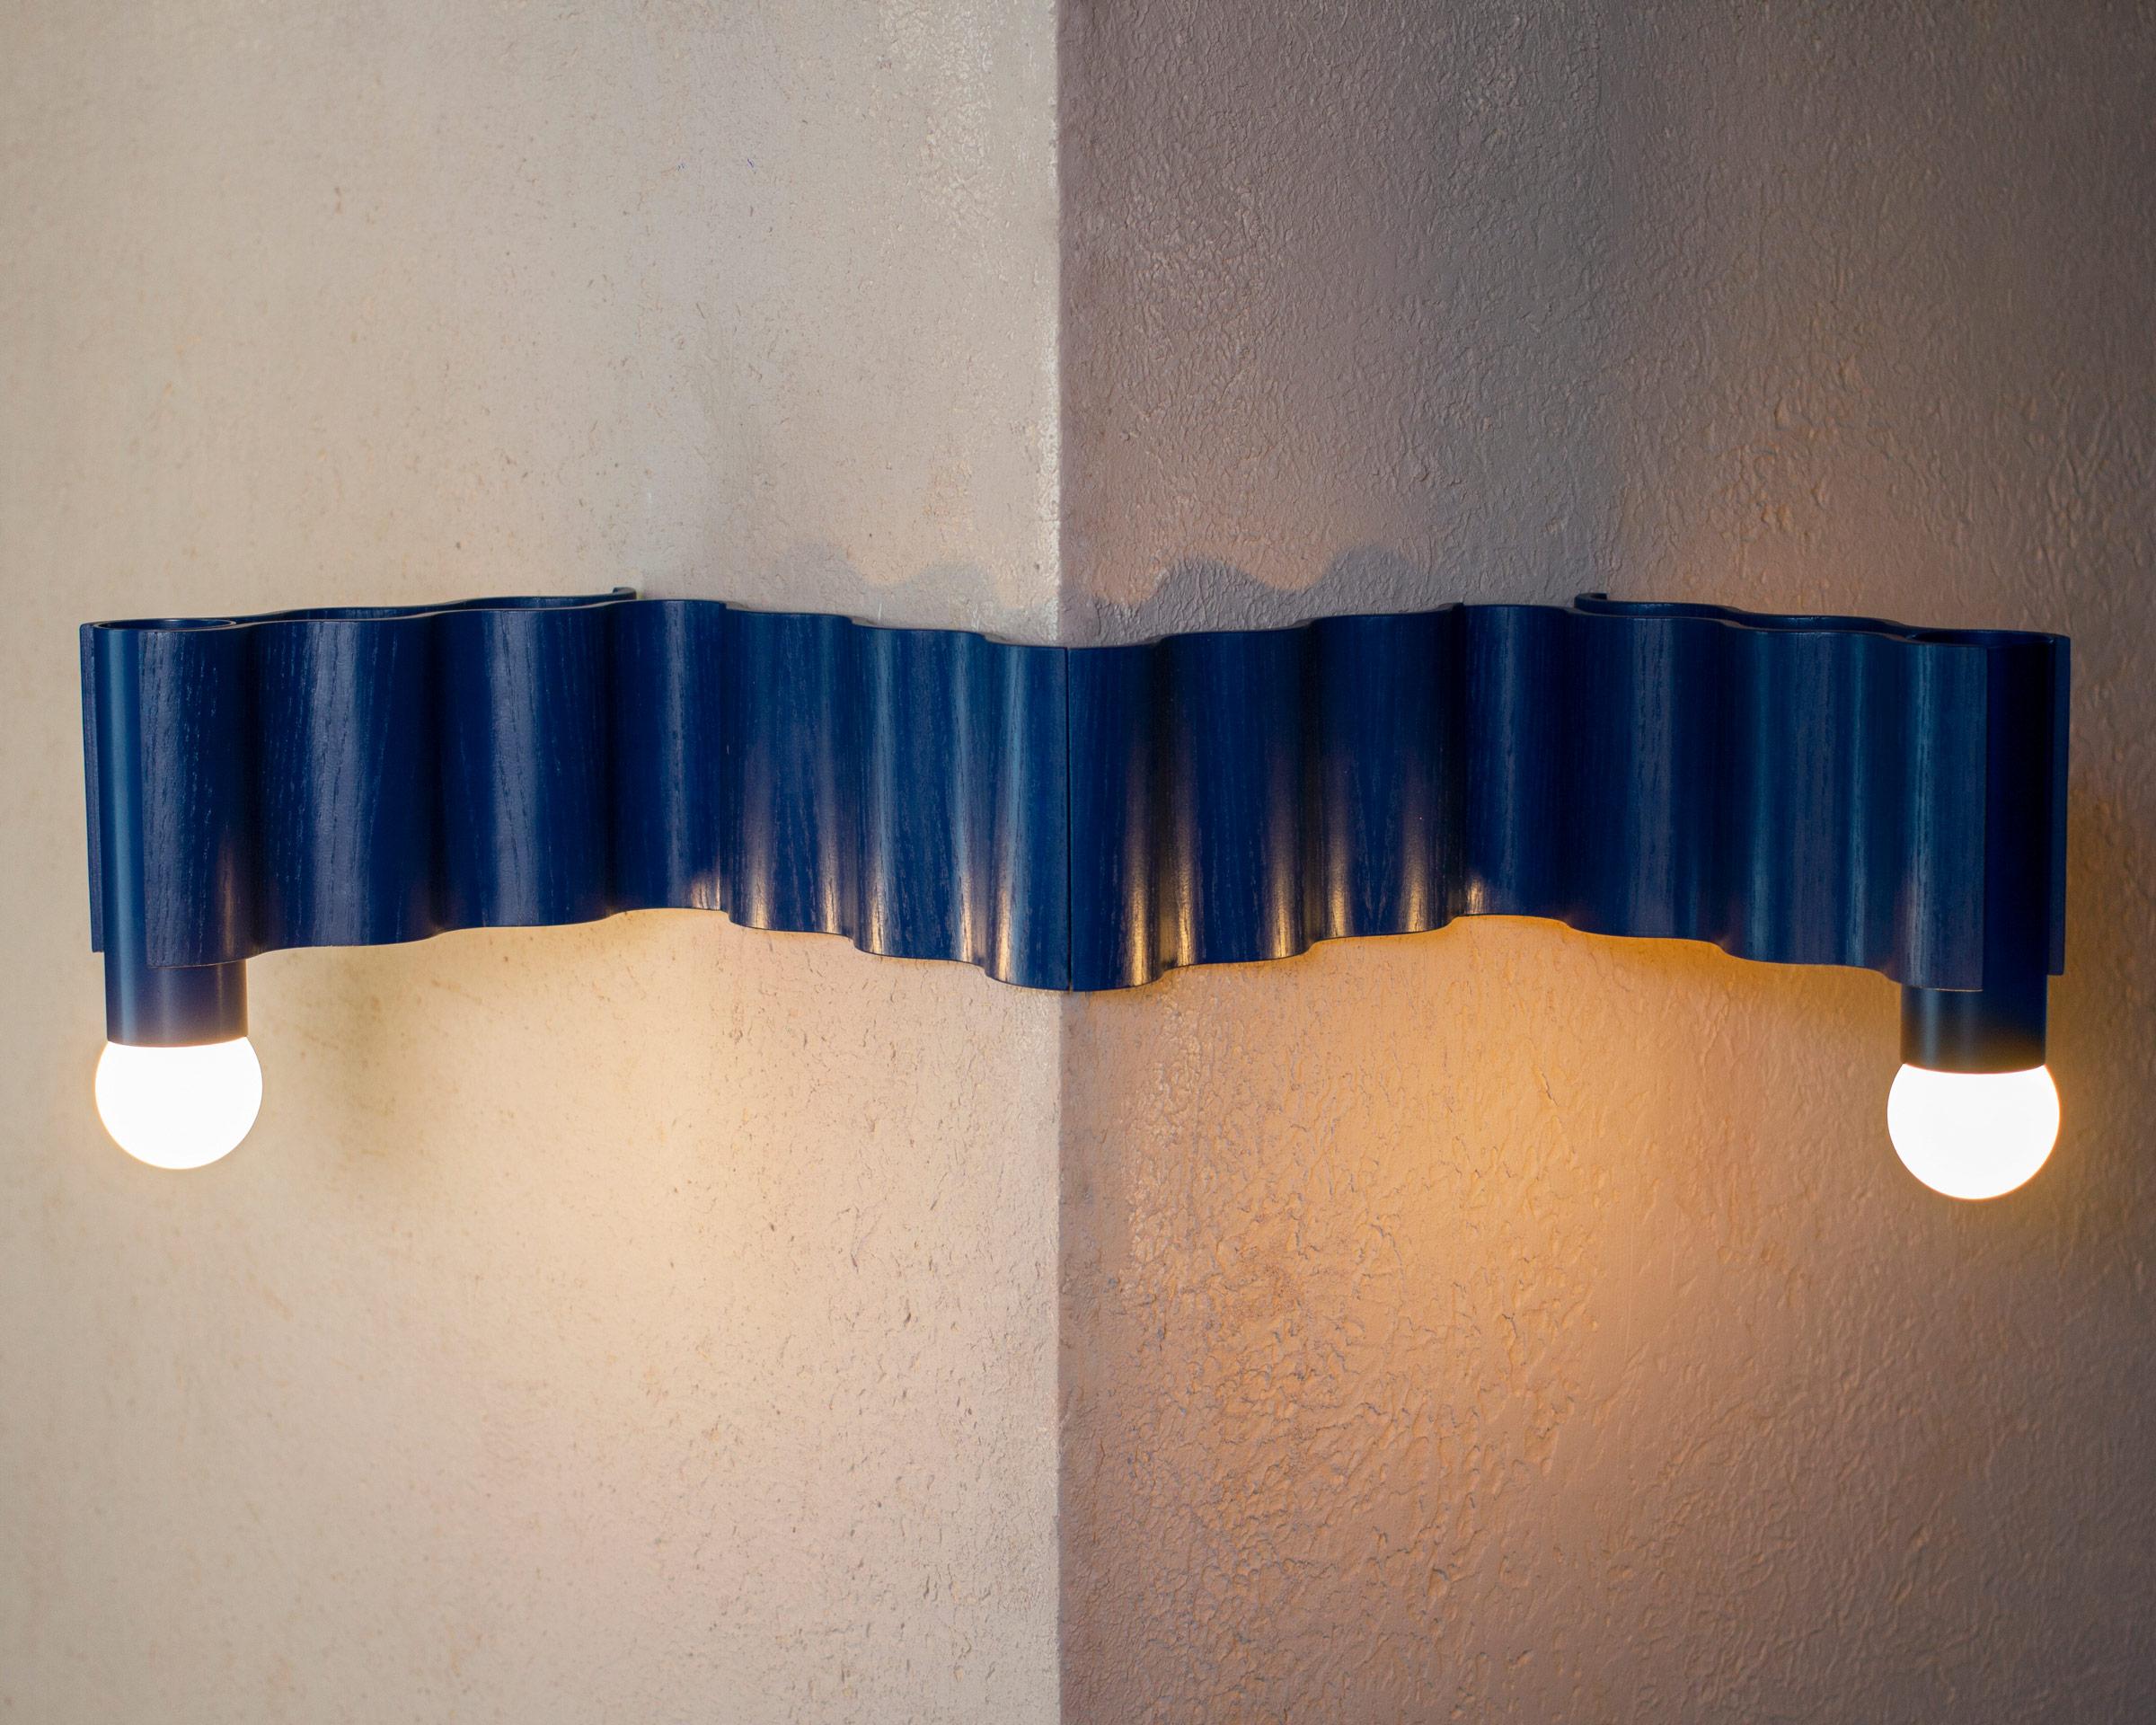 Double Corrugation Sconce / Wall Light in Pastel Blue In New Condition For Sale In London, GB